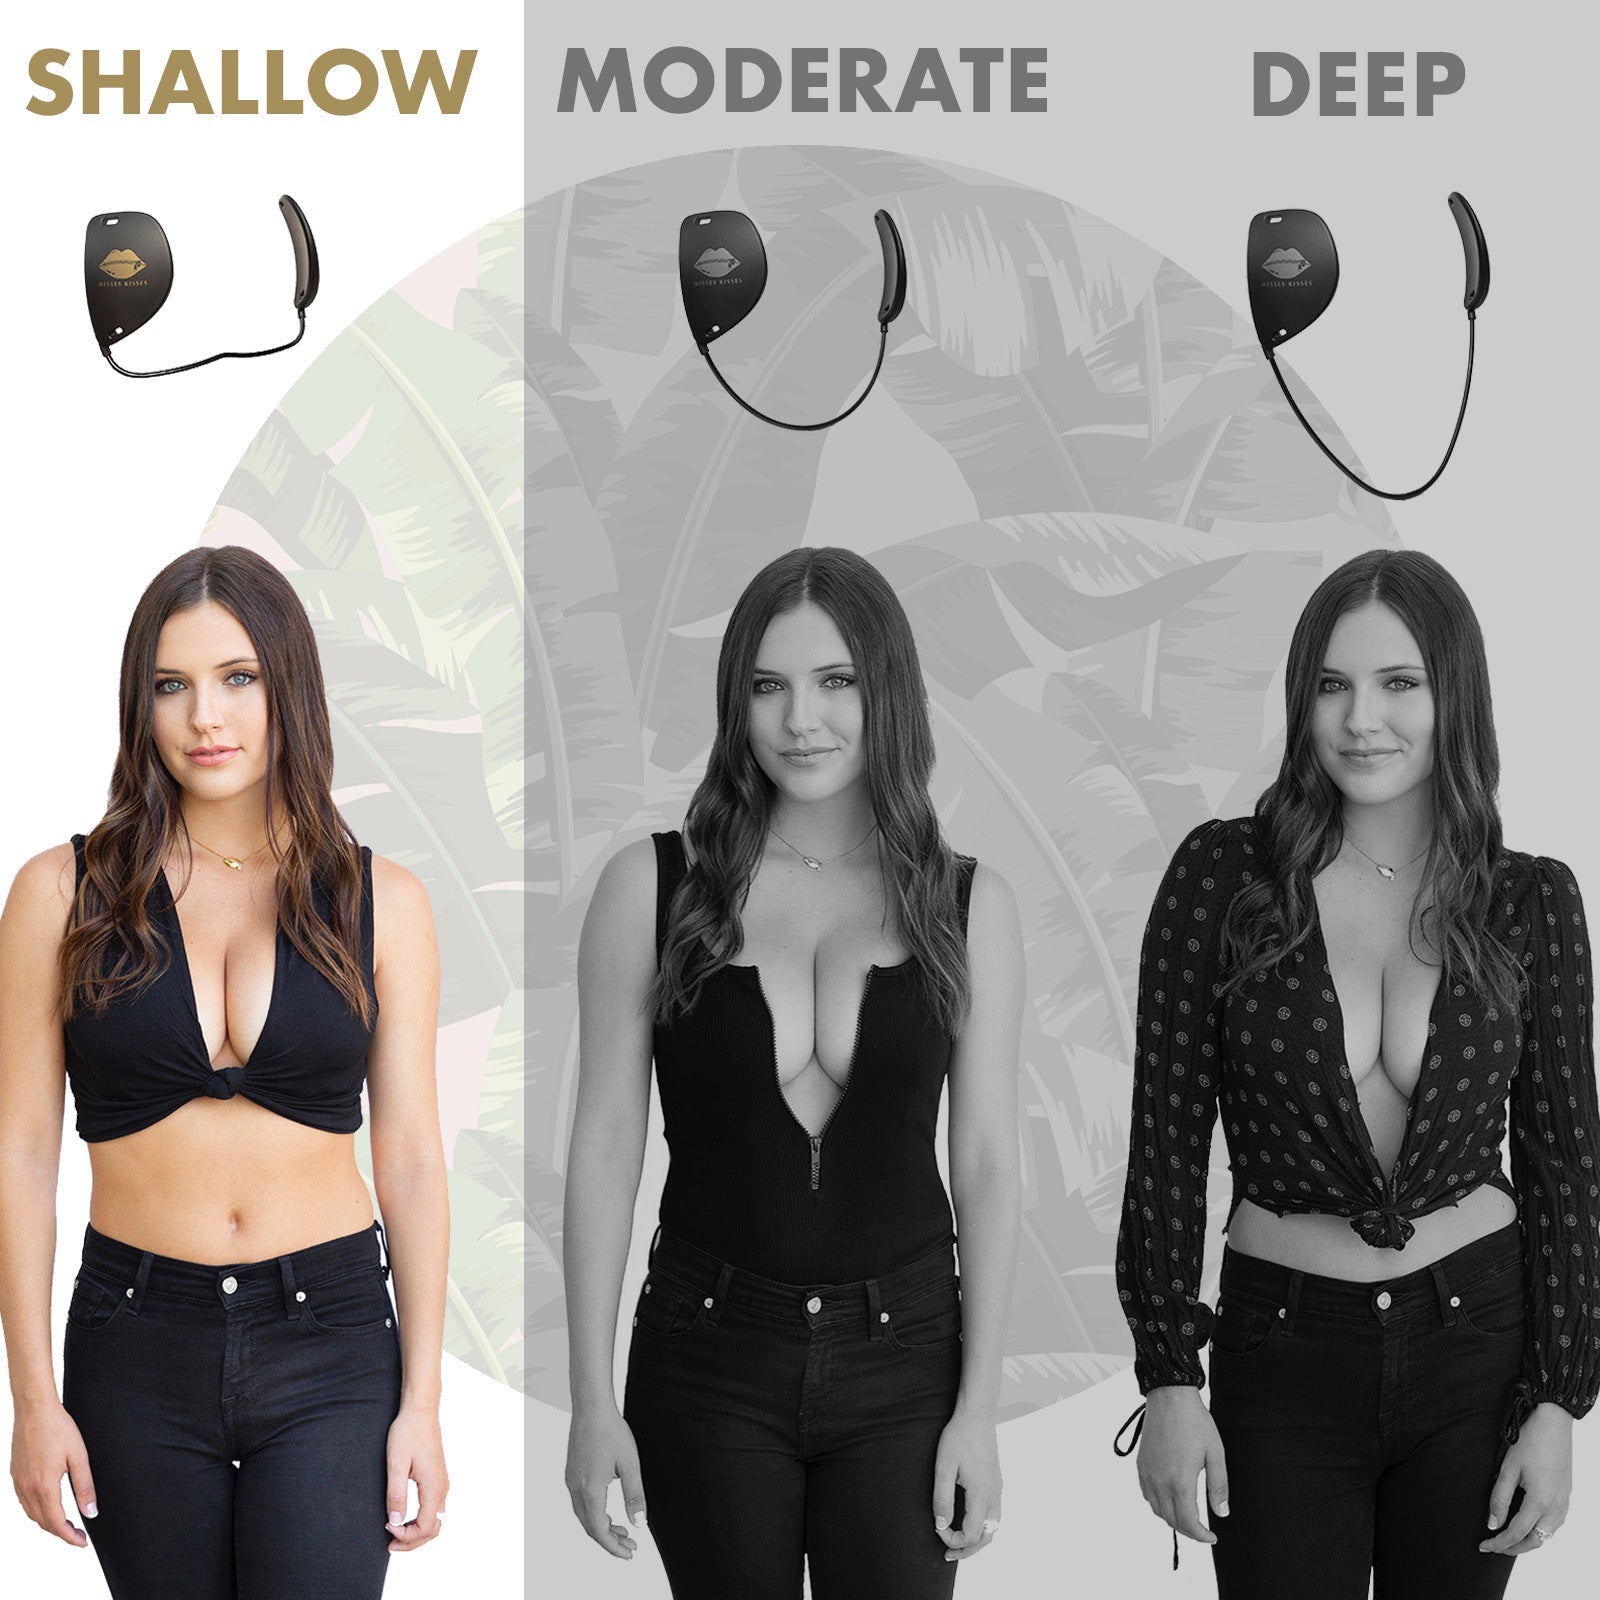 Misseskisses Plunge Bra that will change your life and style NO